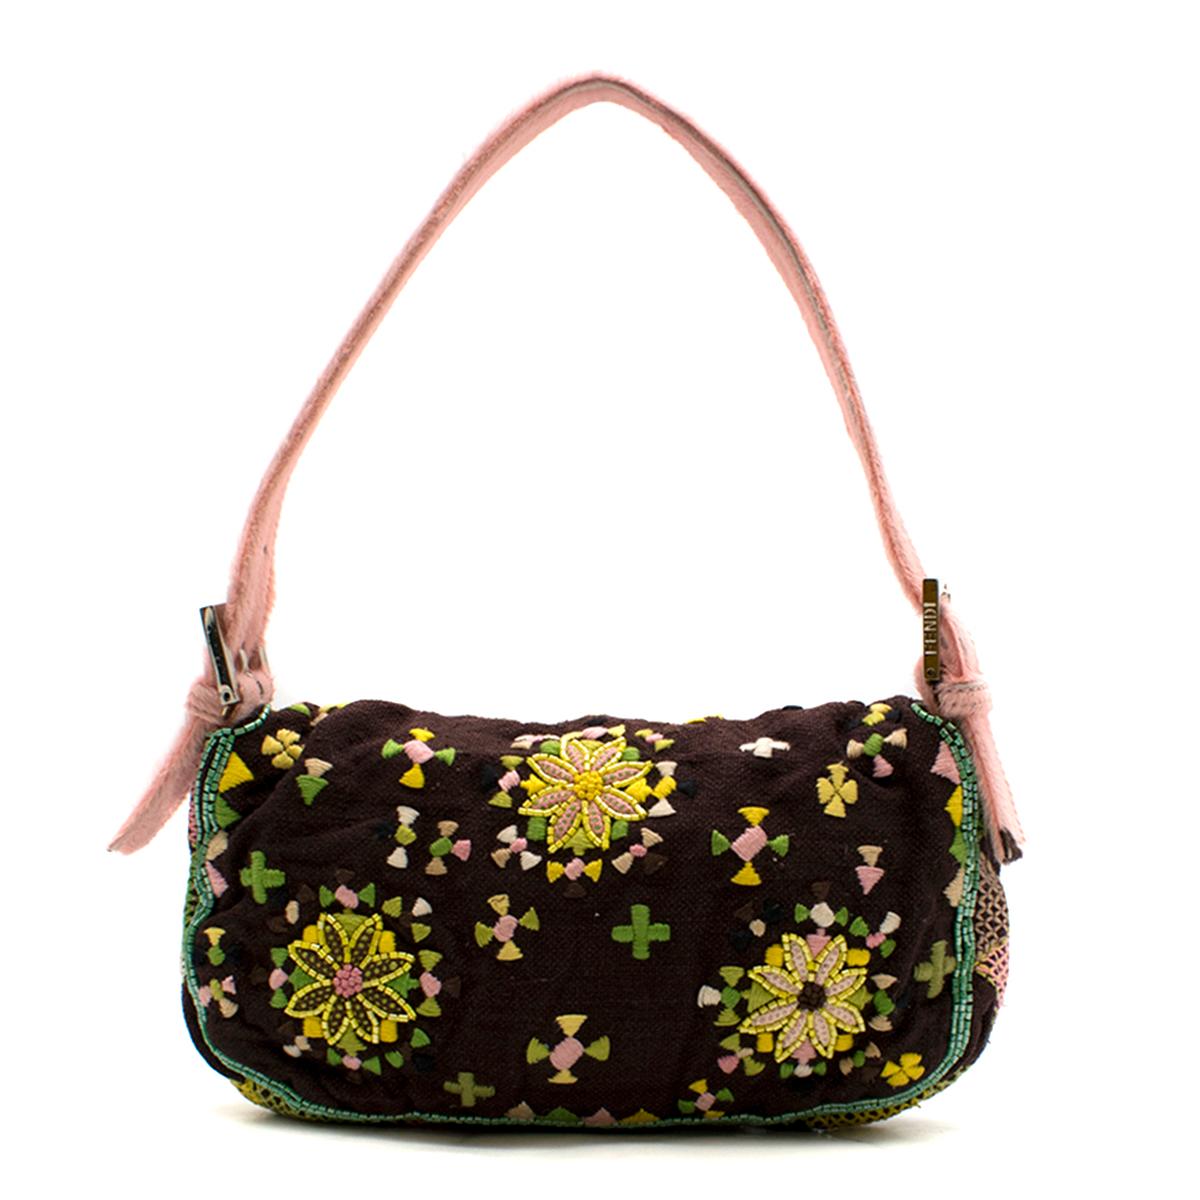 Fendi Brown & Yellow Floral Embroidered Baguette Bag

-Brown, Canvas
-Beaded floral embroidering 
-Beaded green lining 
-Fur push button closure 
-Satin interior lining
-Fur zip internal pocket
-Fur handle with adjustable strap

Please note, these